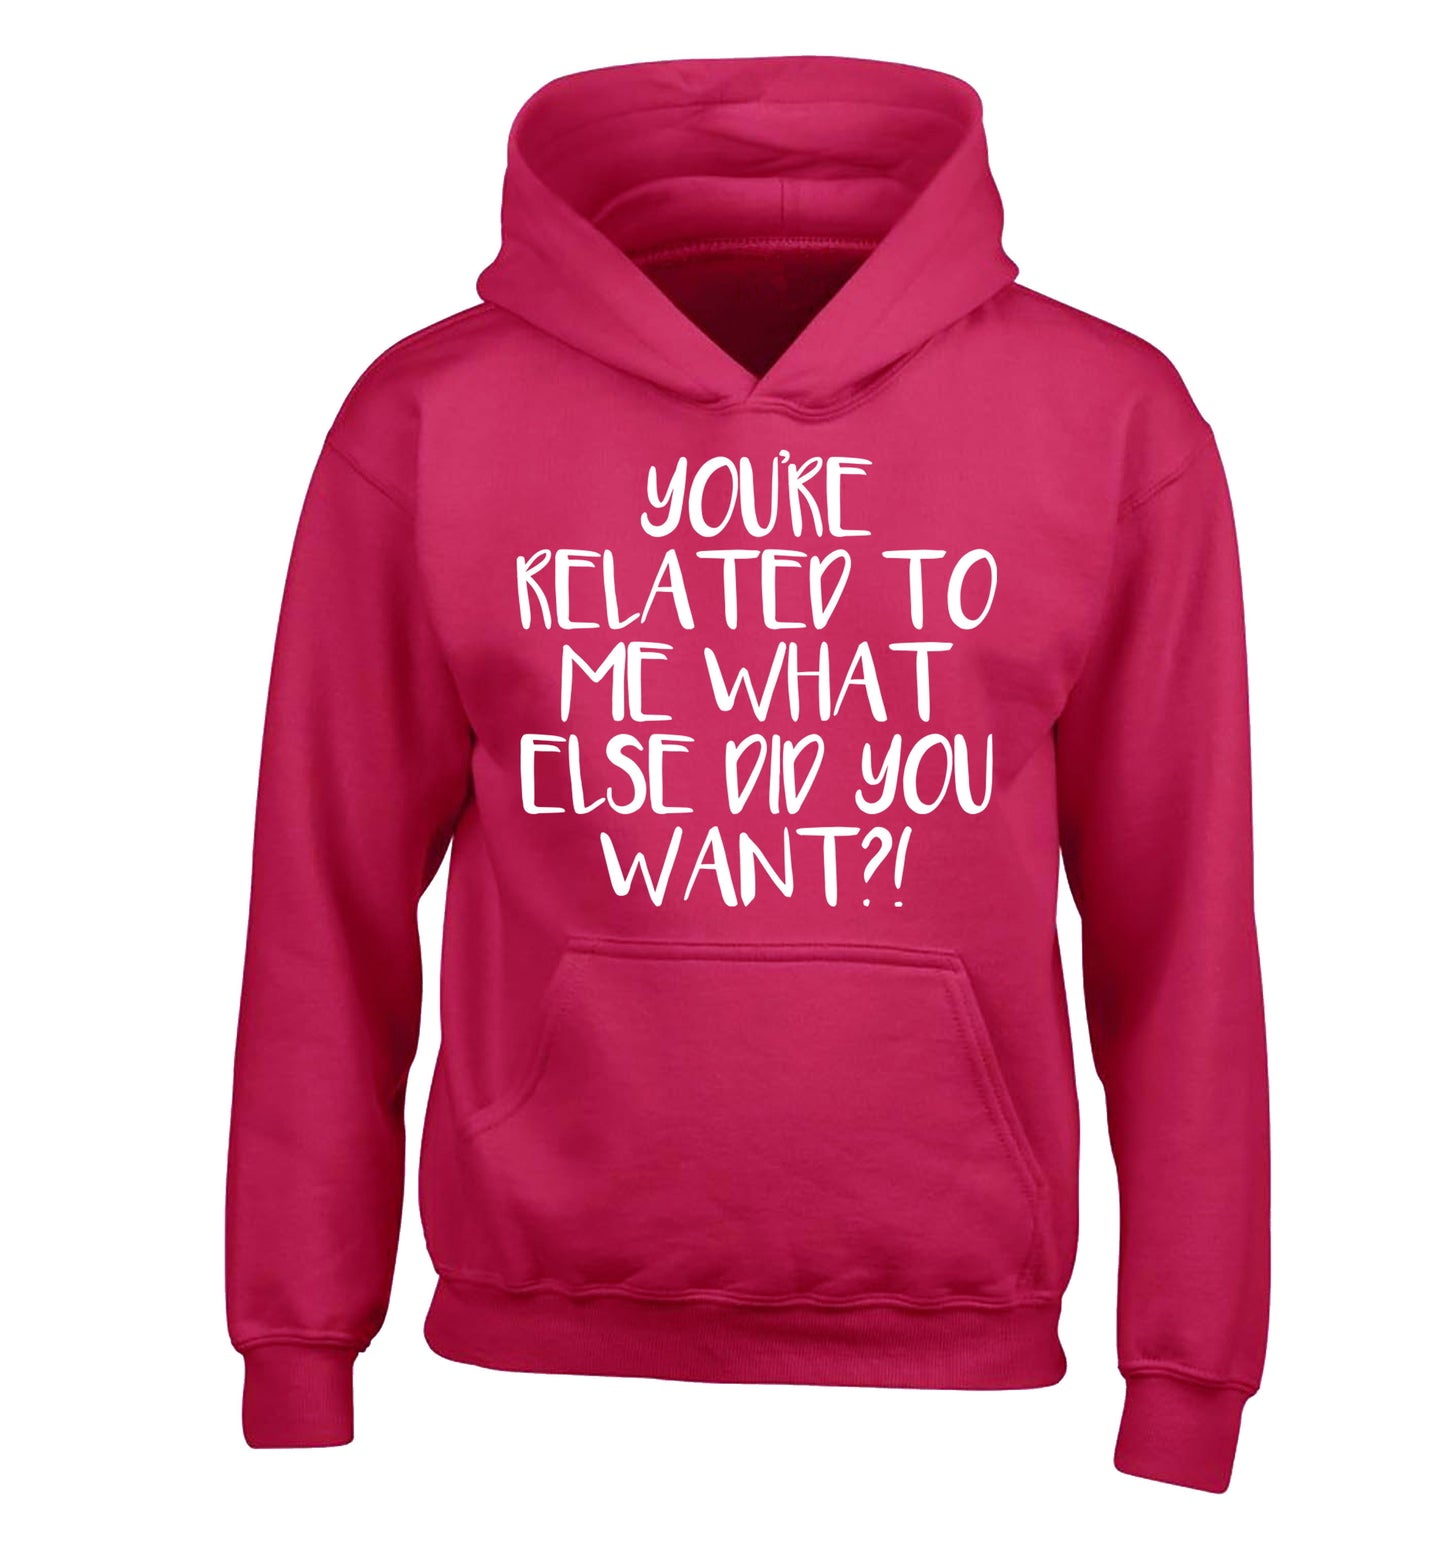 You're related to me what more do you want? children's pink hoodie 12-13 Years